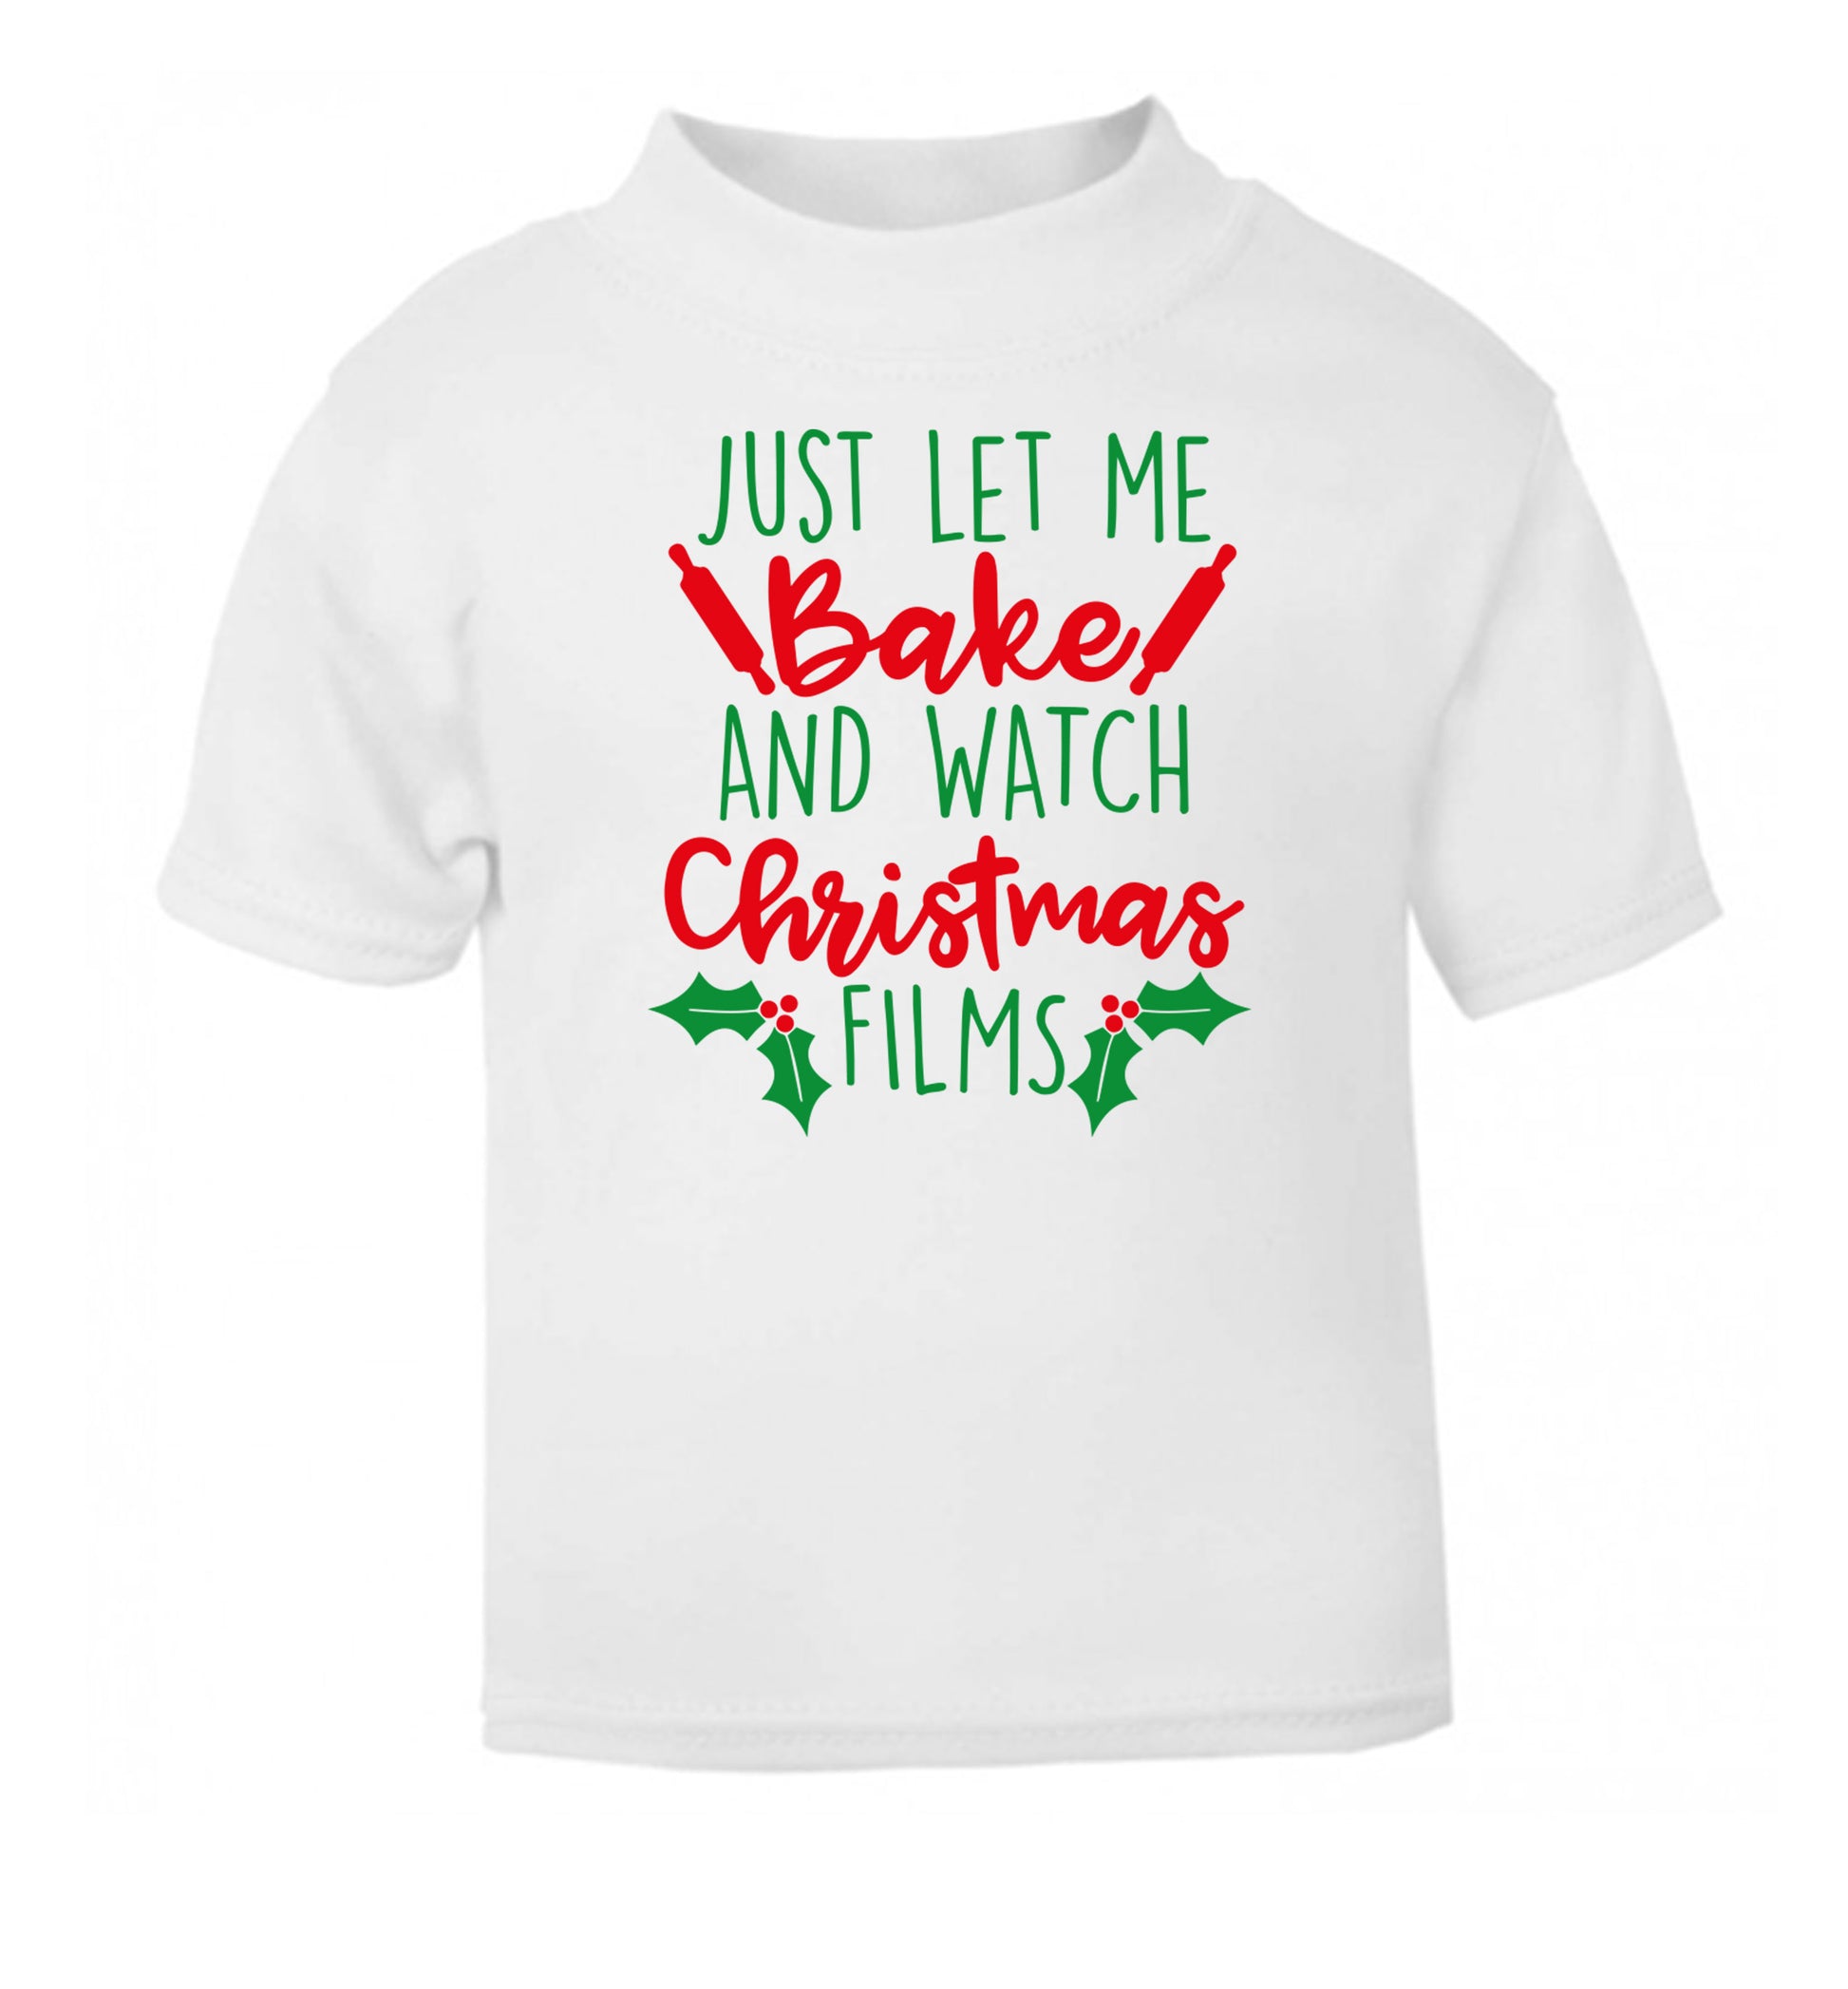 Just let me bake and watch Christmas films white Baby Toddler Tshirt 2 Years